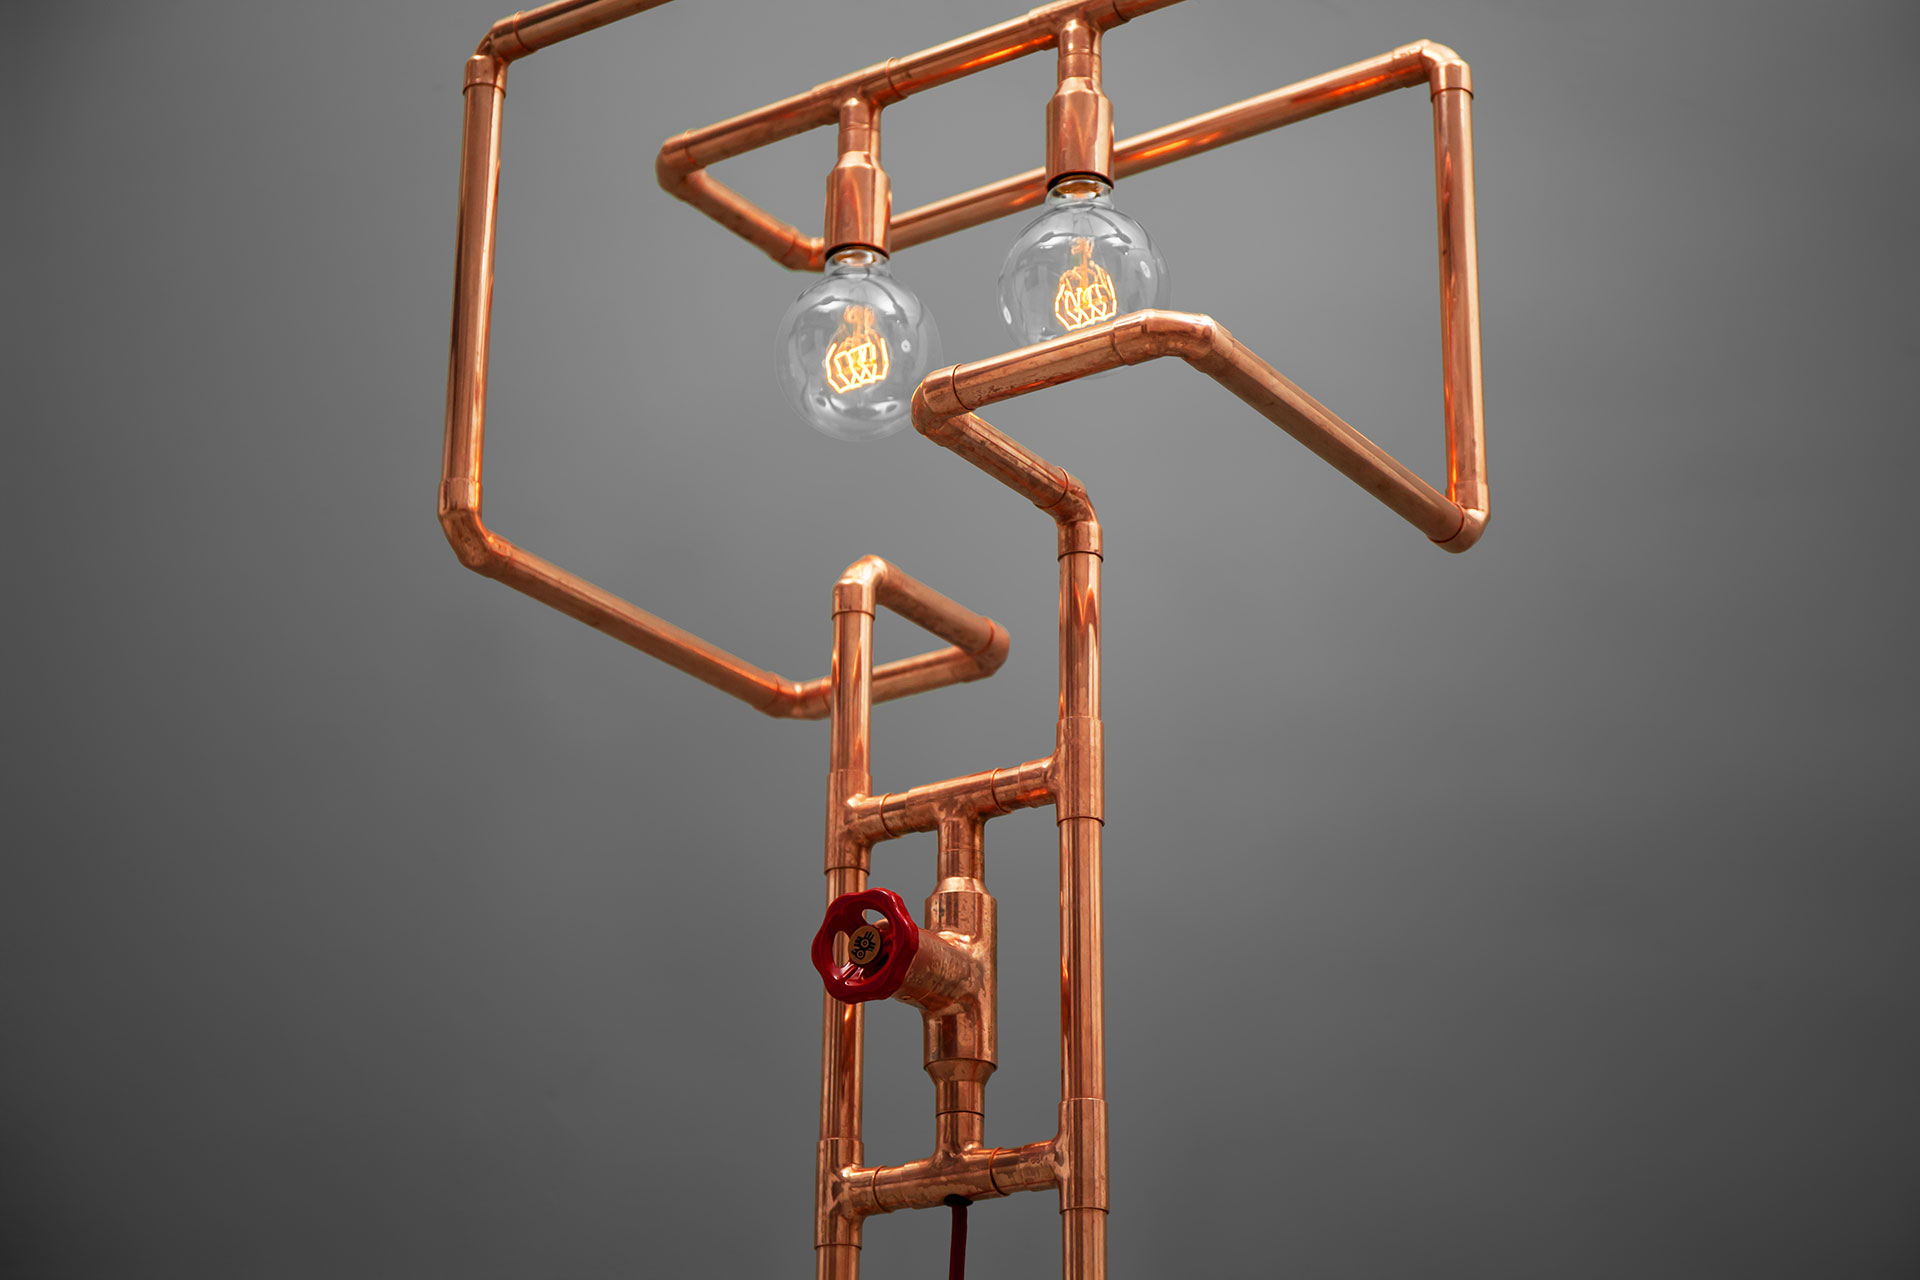 Creative design floor lamp in trendy copper or modern brass inspired by pipes installation